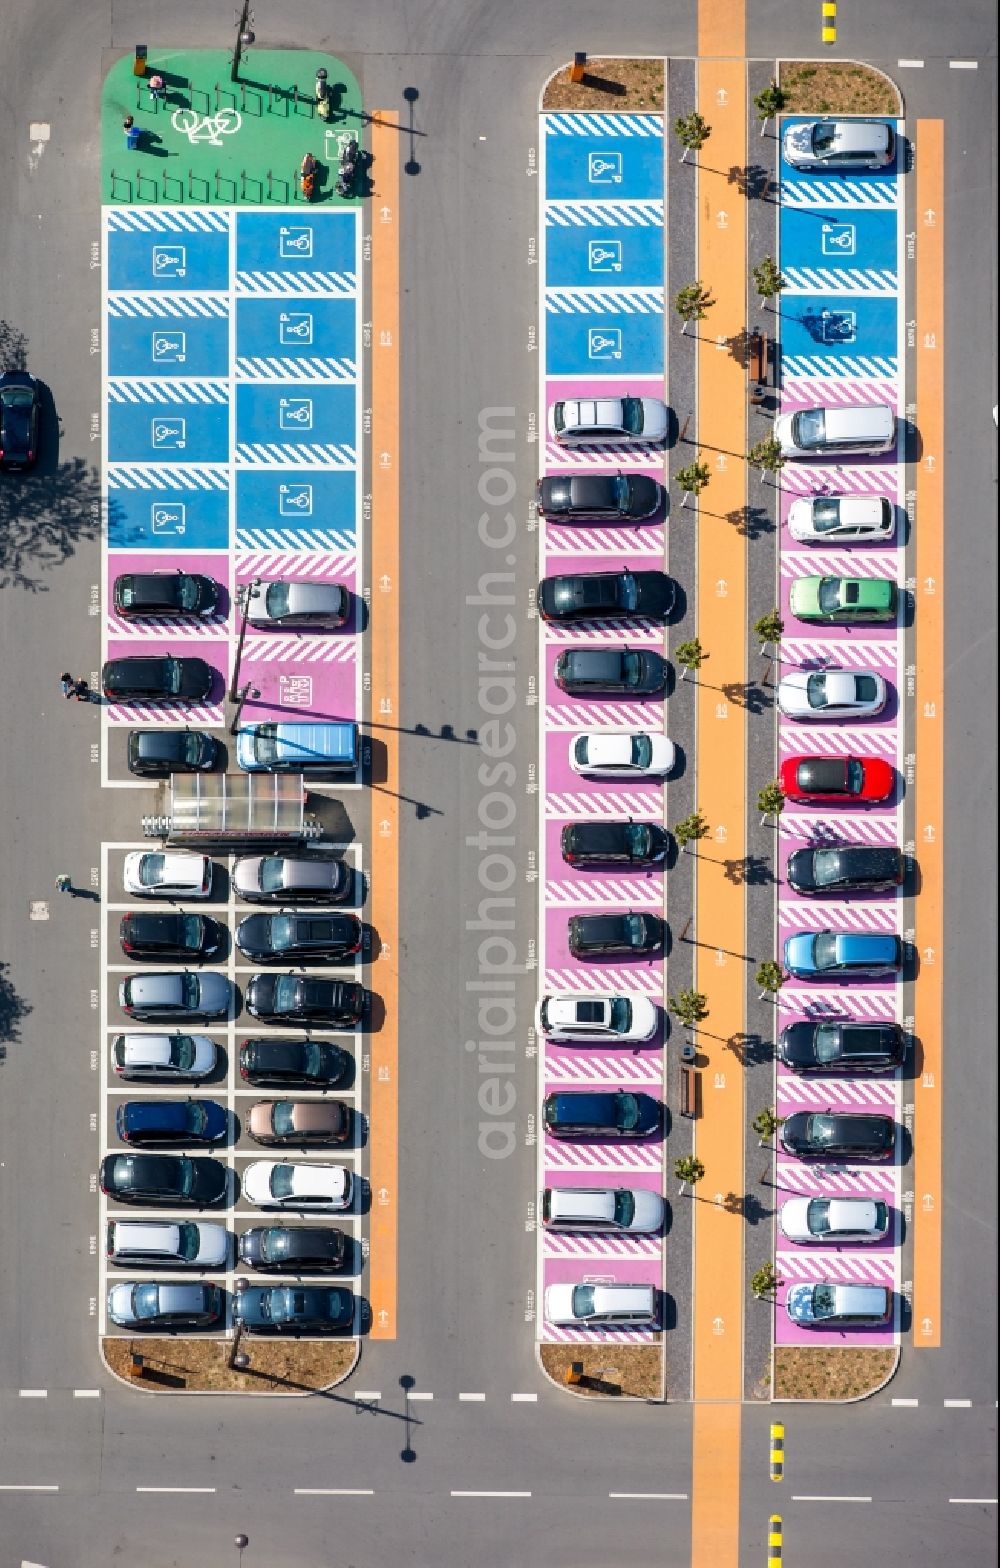 Bochum from above - Hot pink color-coded rows of women parking and disabled parking spaces in the parking lot for automobiles at the Ruhr Park shopping center in Bochum in North Rhine-Westphalia